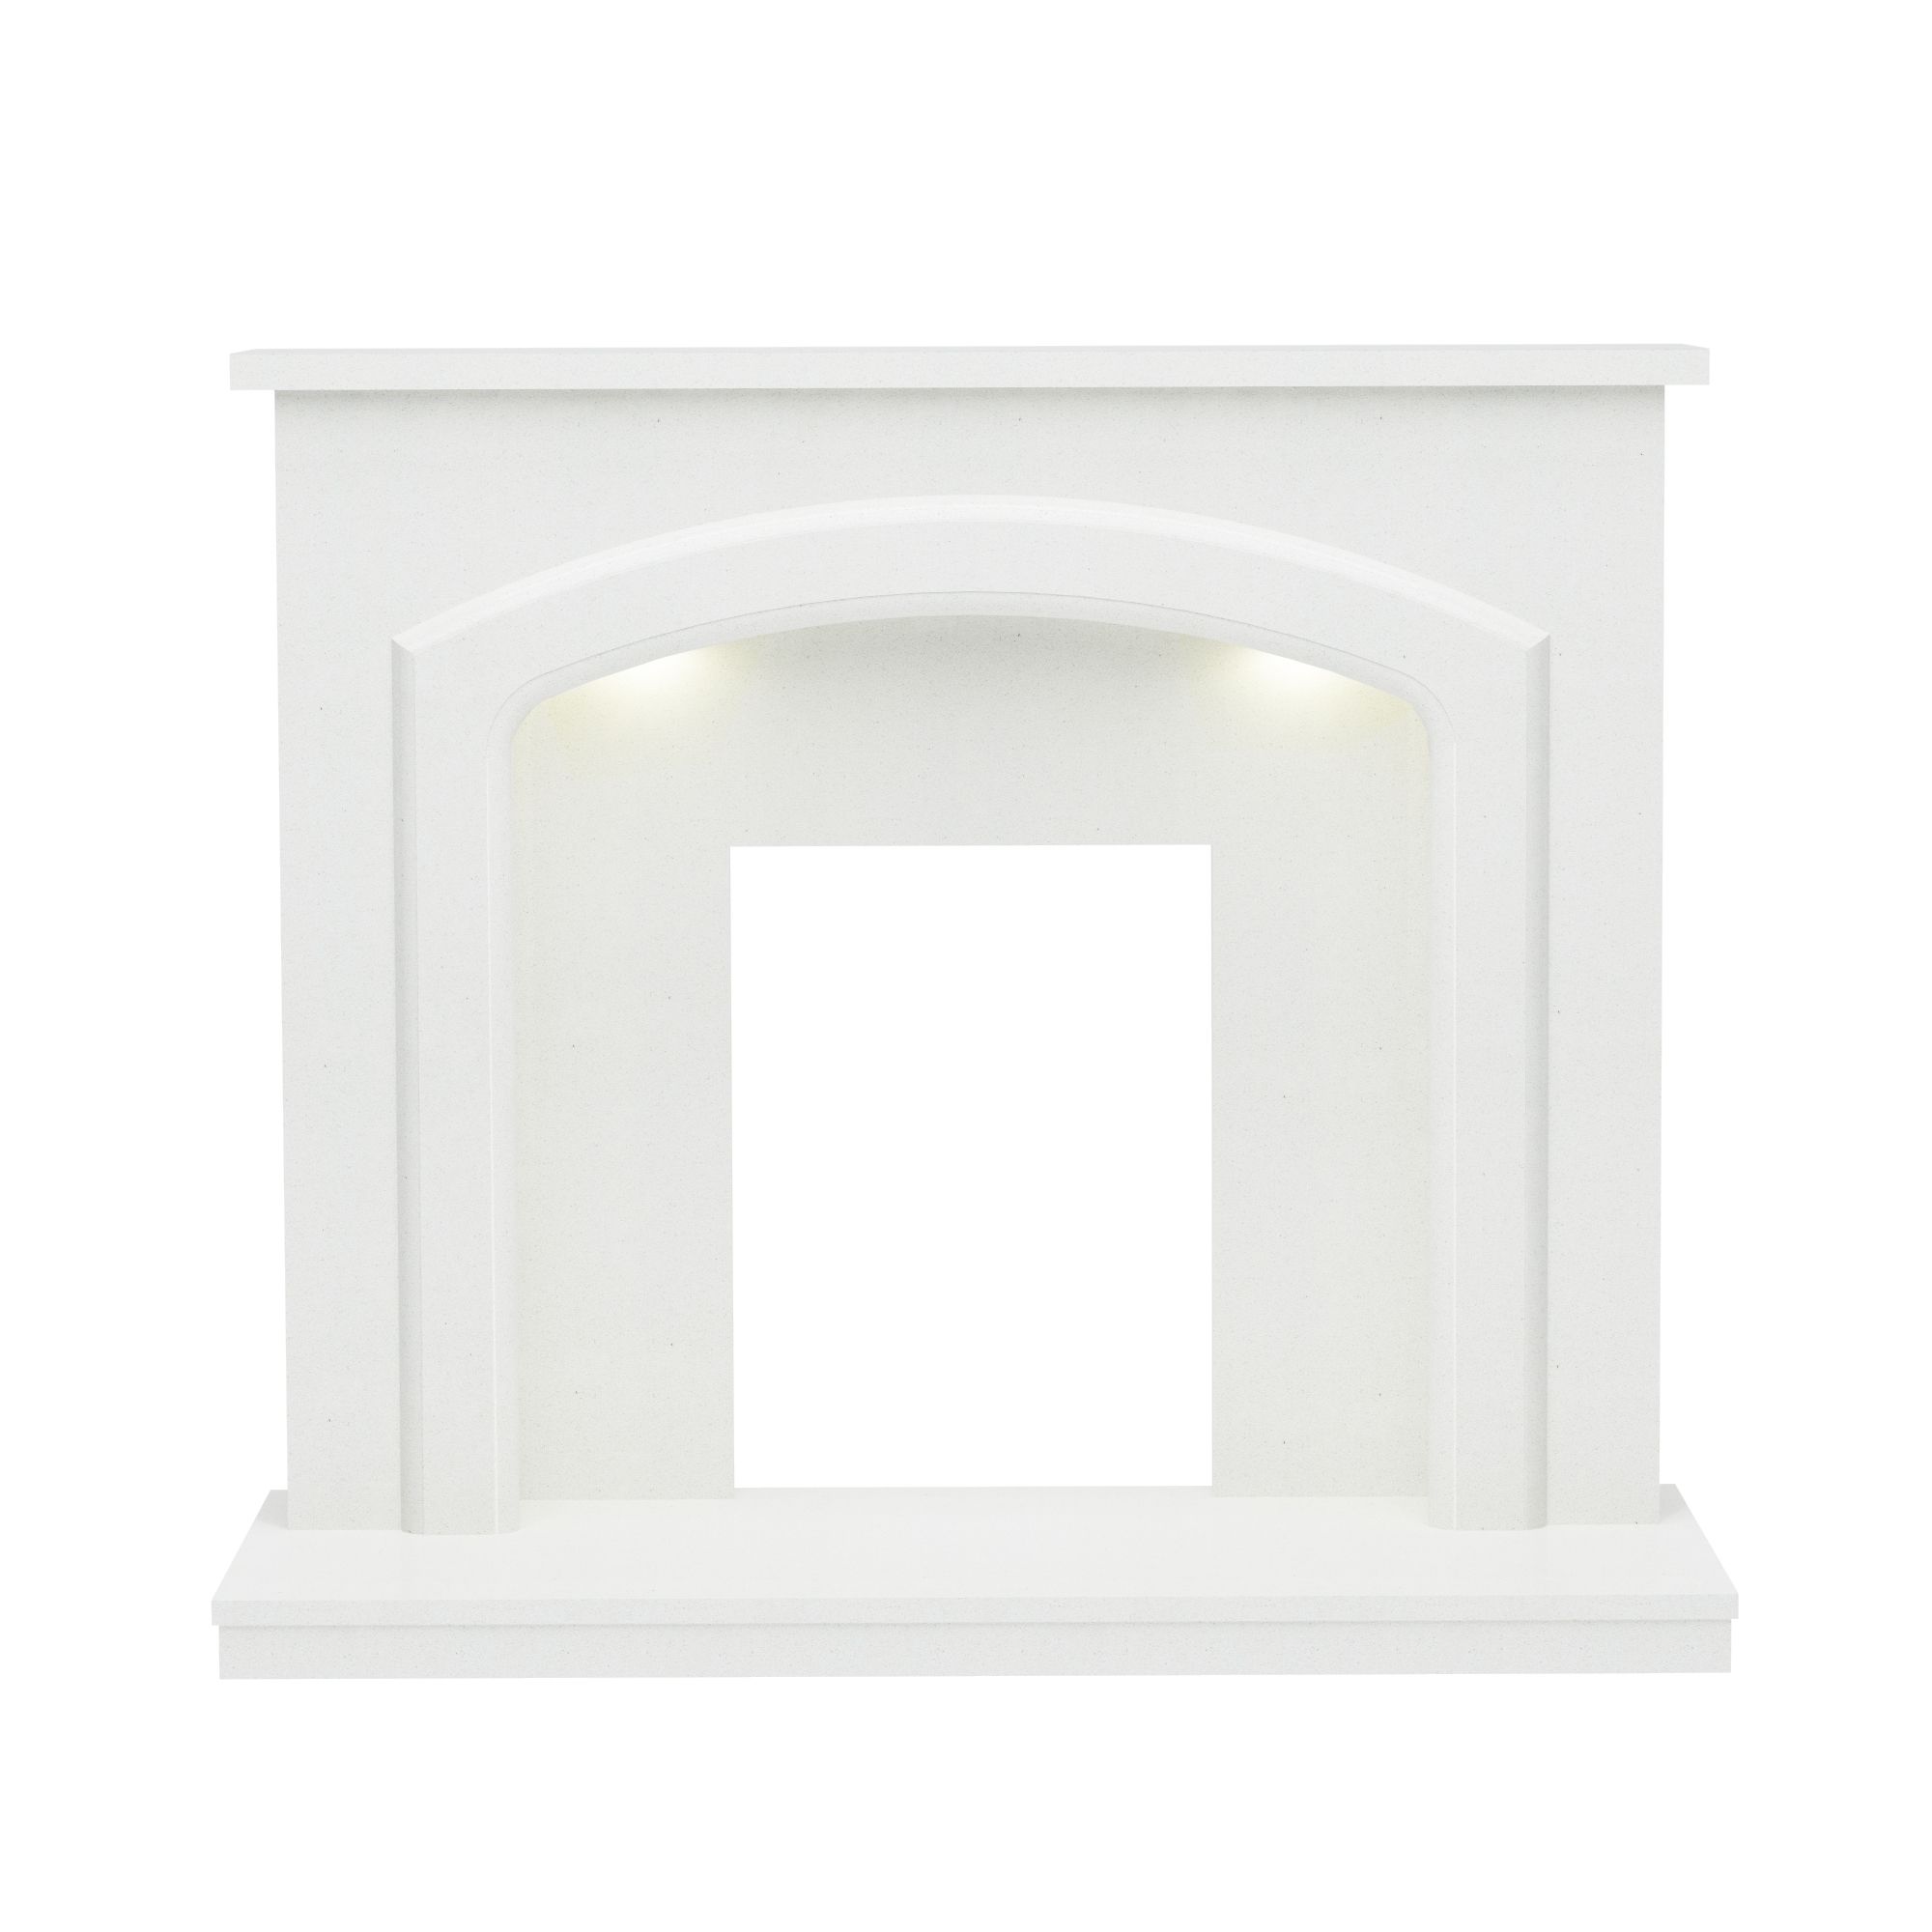 Be Modern Perlita White Fire surround set with Lights included